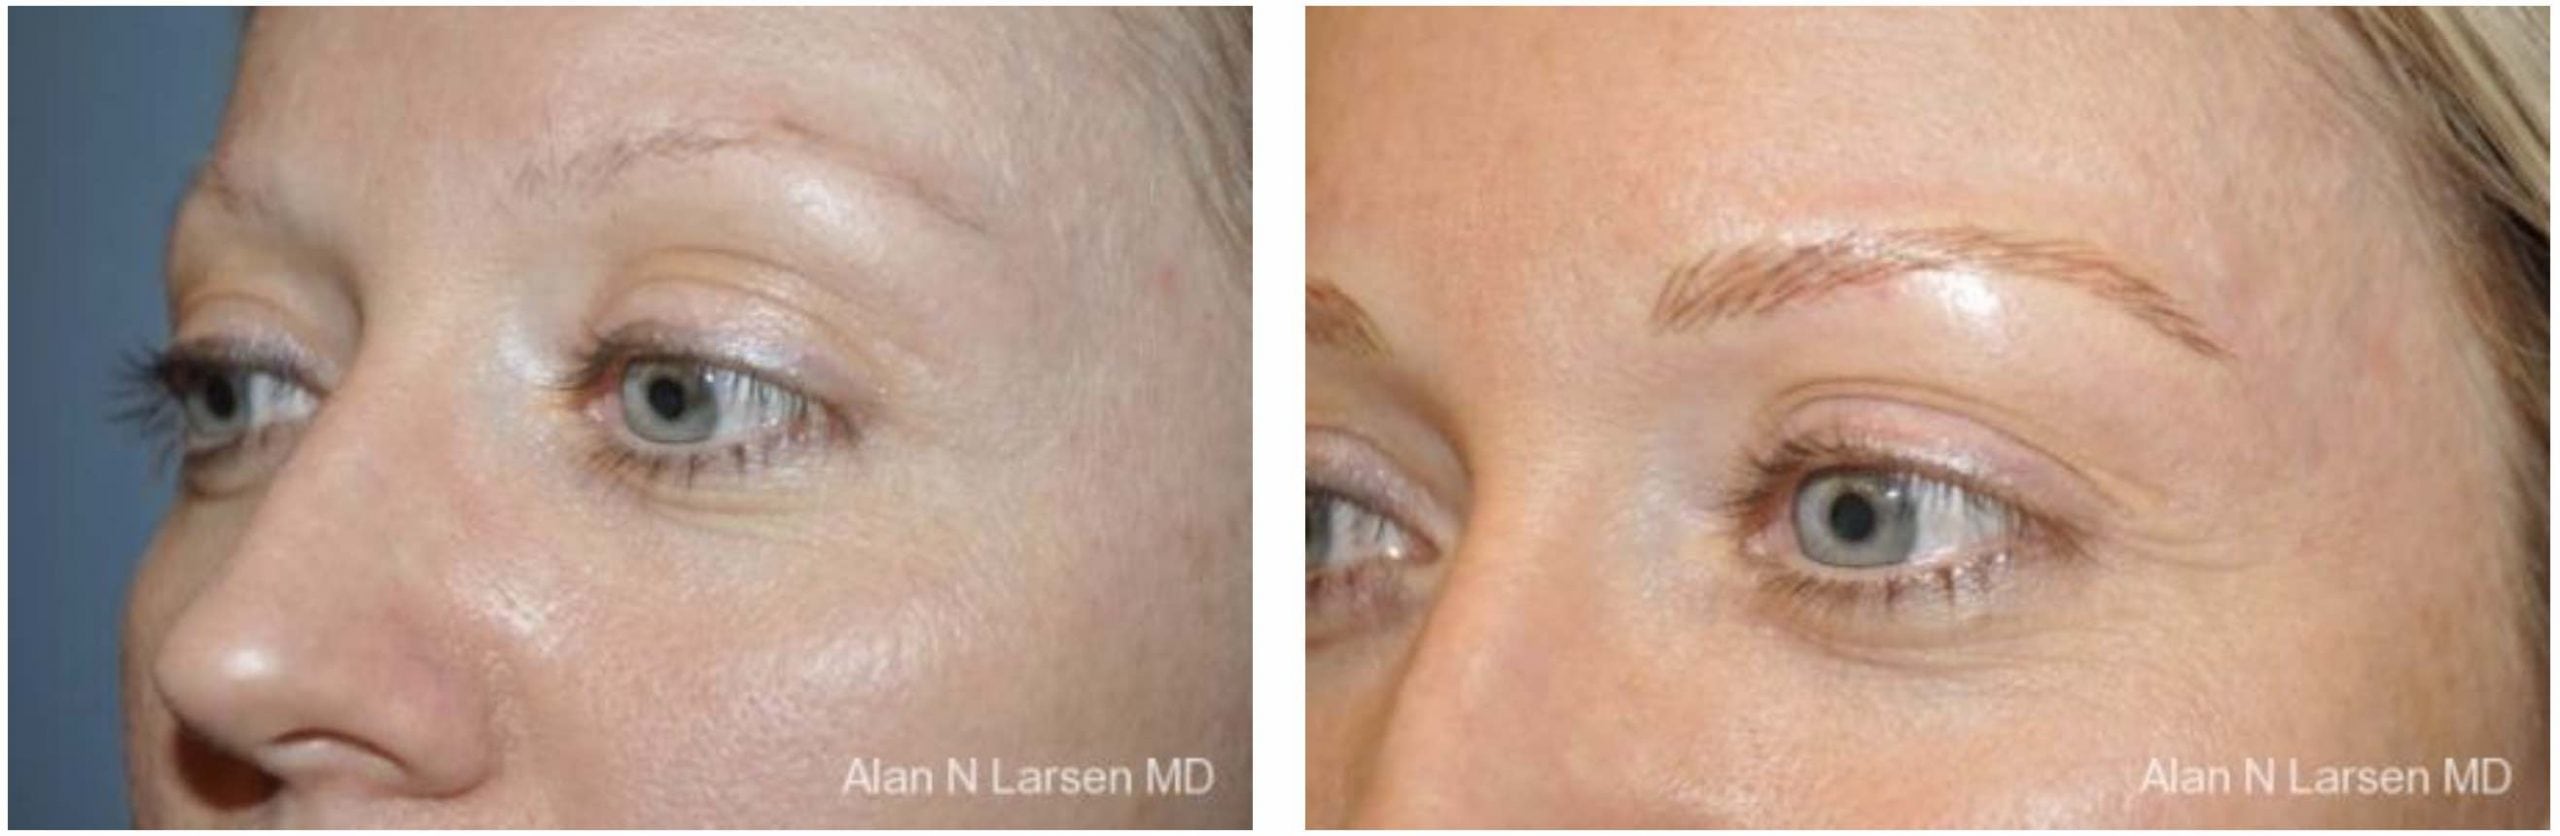 LUX Med Spa at Before and After Photo Gallery | Microblading | Buckhead Plastic Surgery | Alan N. Larsen, MD | Board-Certified Plastic Surgeon | Atlanta GA